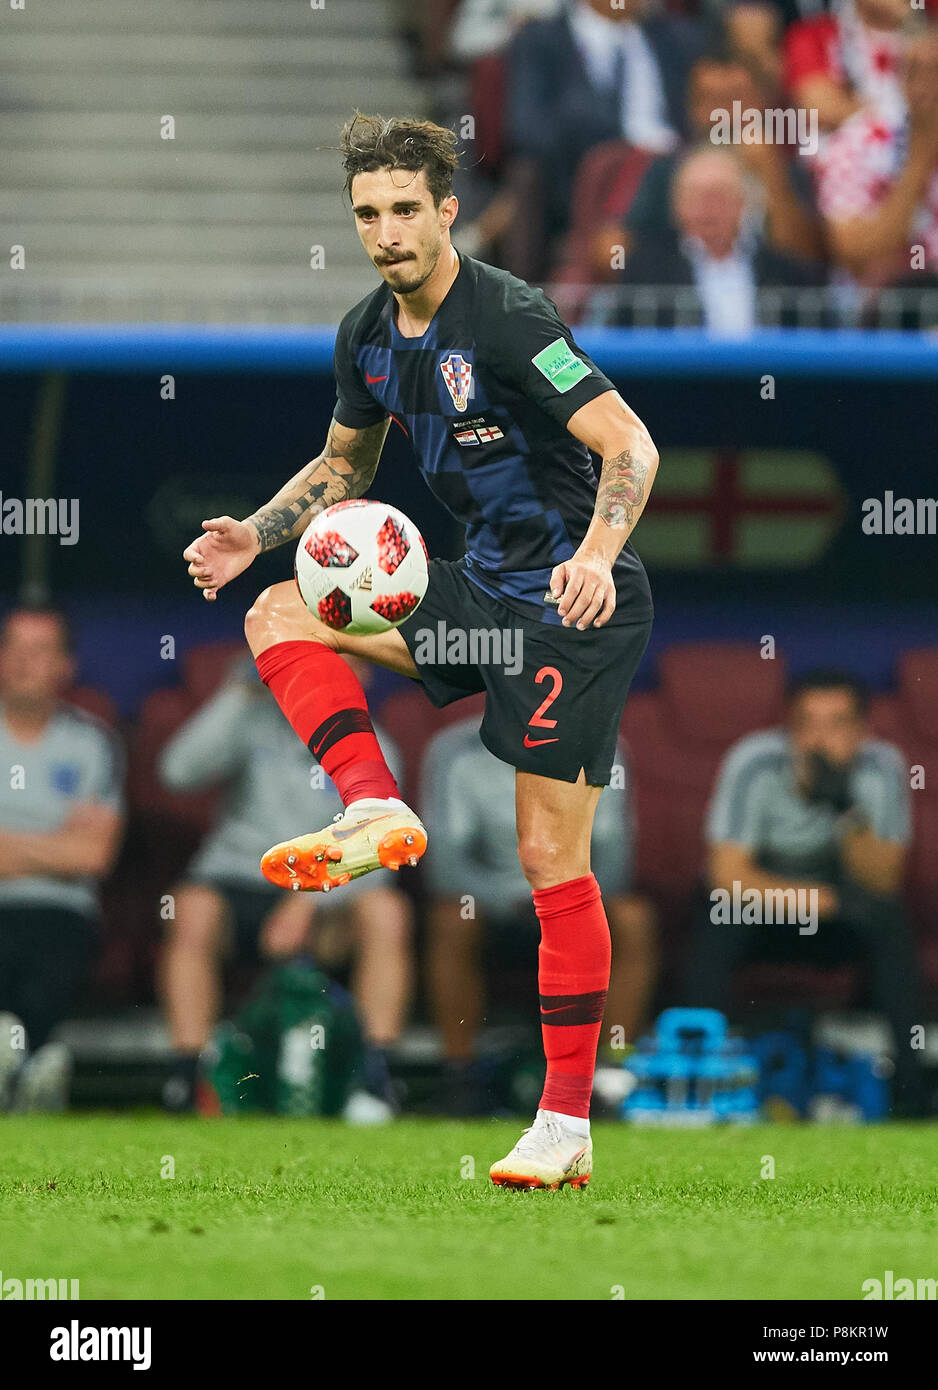 England - Croatia, Soccer, Moscow, July 11, 2018 Sime VRSALJKO, Croatia Nr.2  drives, controls the ball, action, full-size, Single action with ball, full body, whole figure, cutout, single shots, ball treatment, pick-up, header, cut out,  ENGLAND  - CROATIA 1-2 Football FIFA WORLD CUP 2018 RUSSIA, Semifinal, Season 2018/2019,  July 11, 2018 in Moscow, Russia. © Peter Schatz / Alamy Live News Stock Photo